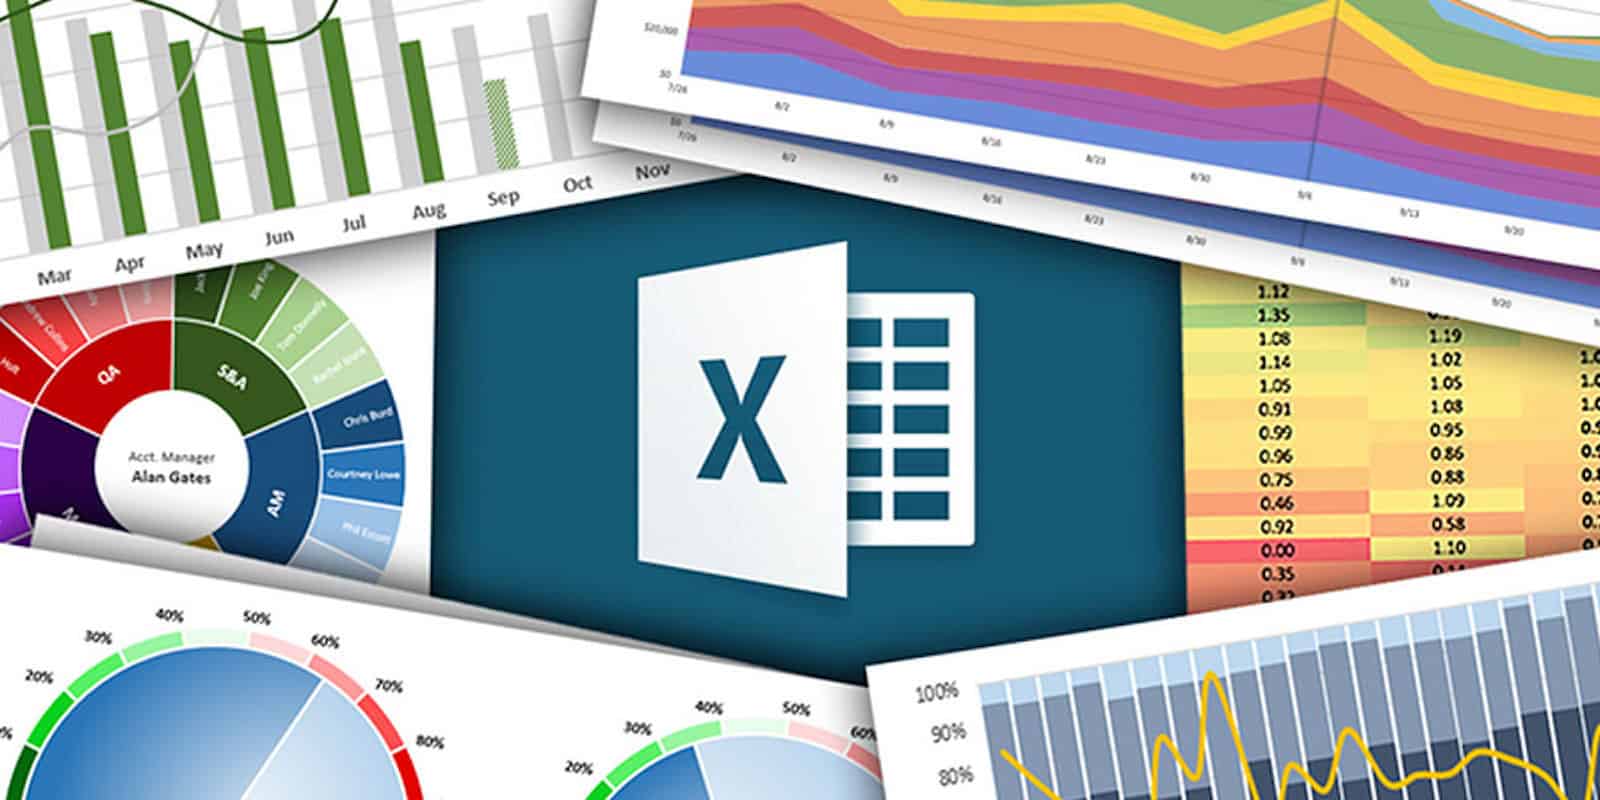 Learn the ins and outs of Microsoft Excel with this comprehensive, hands-on lesson bundle.